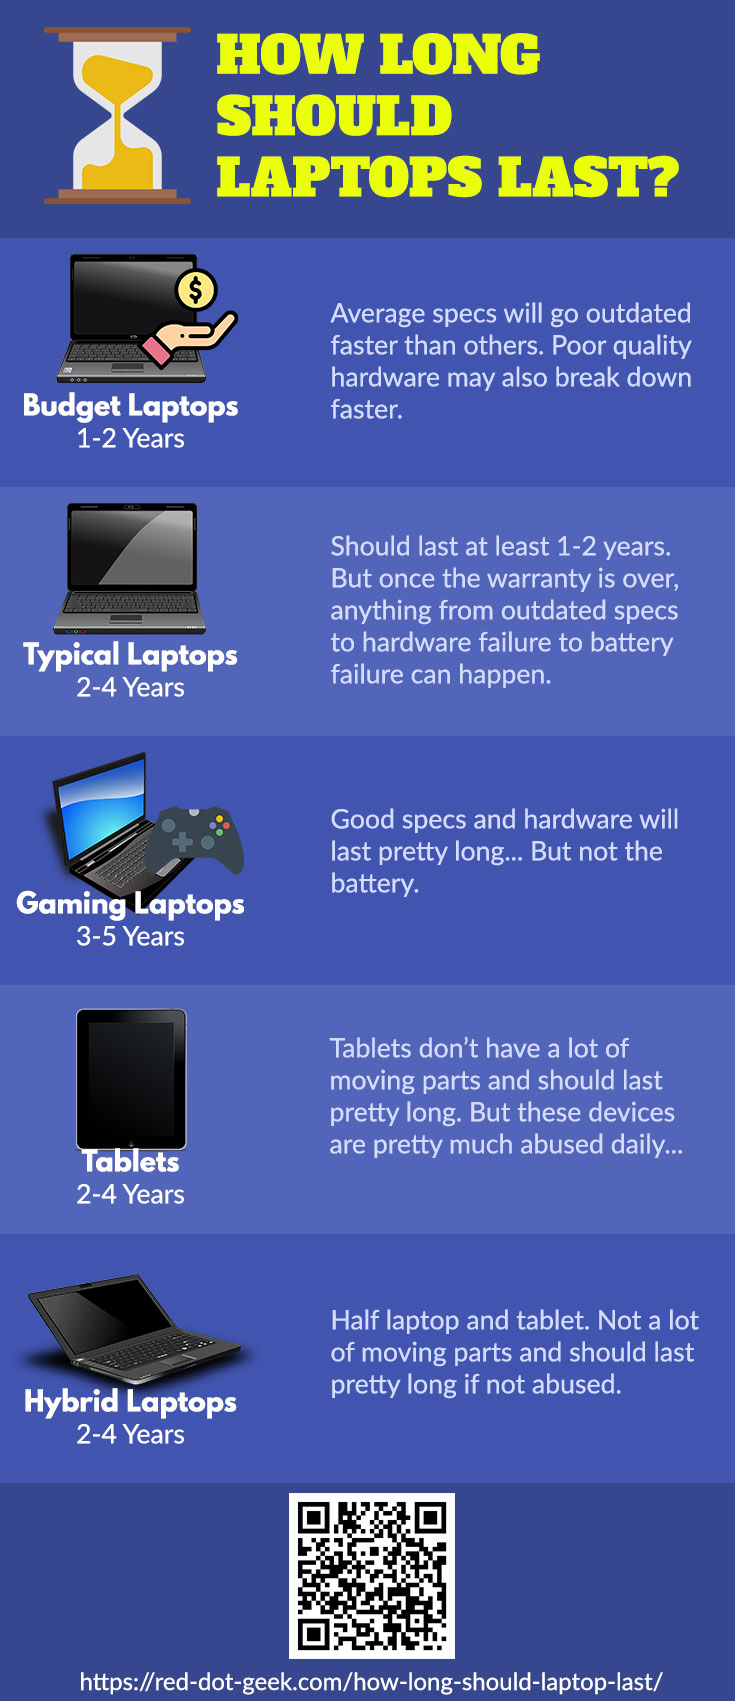 Will a gaming laptop last 5 years?